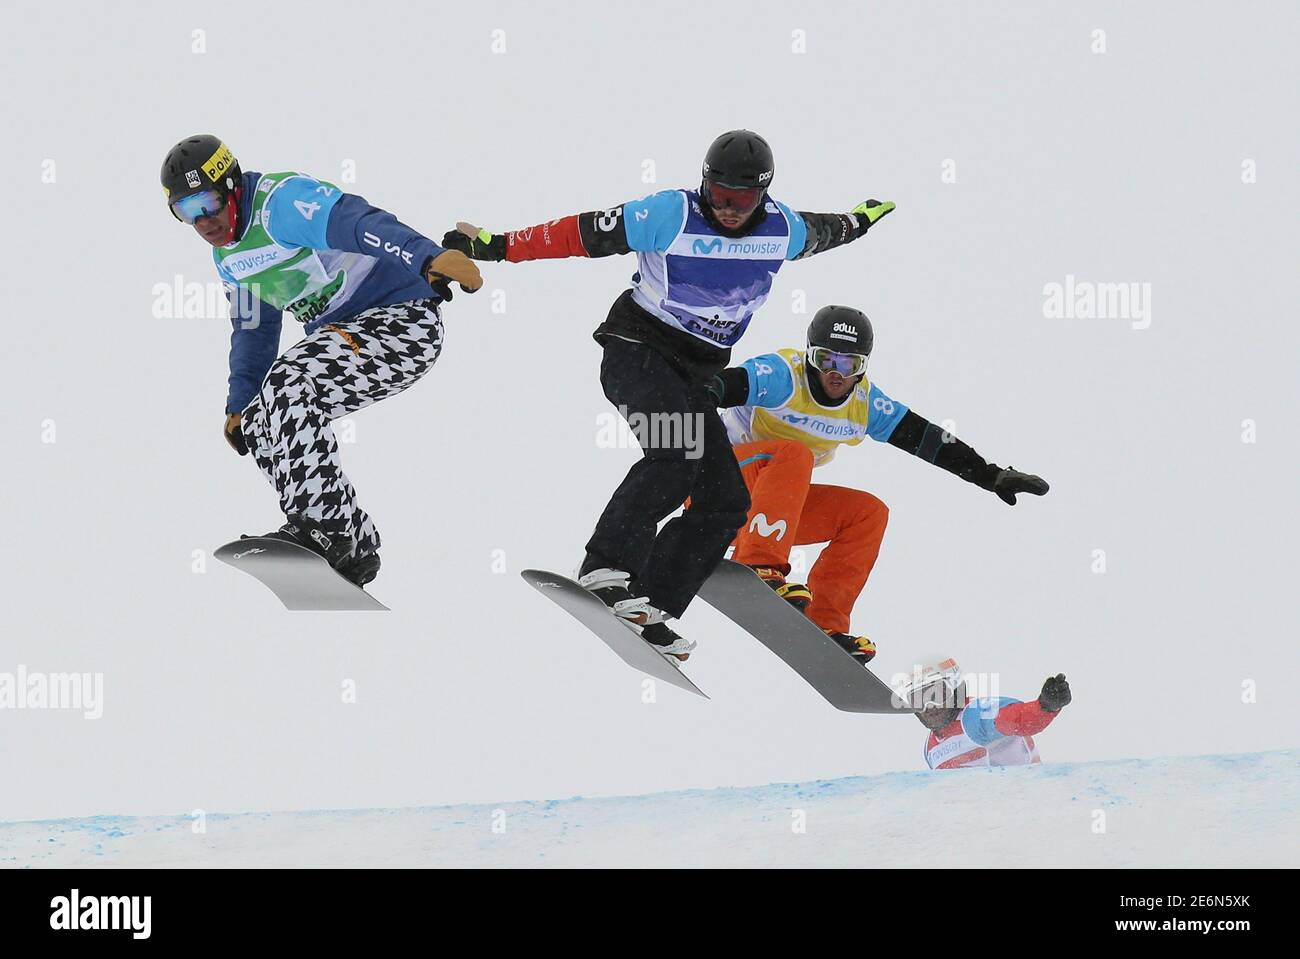 Snowboarding - FIS Snowboarding and Freestyle Skiing World Championships -  Men's Team Snowboard Cross - Sierra Nevada, Spain - 13/03/17 (L to R) Nick  Baumgartner of the US, Chris Robanske of Canada,